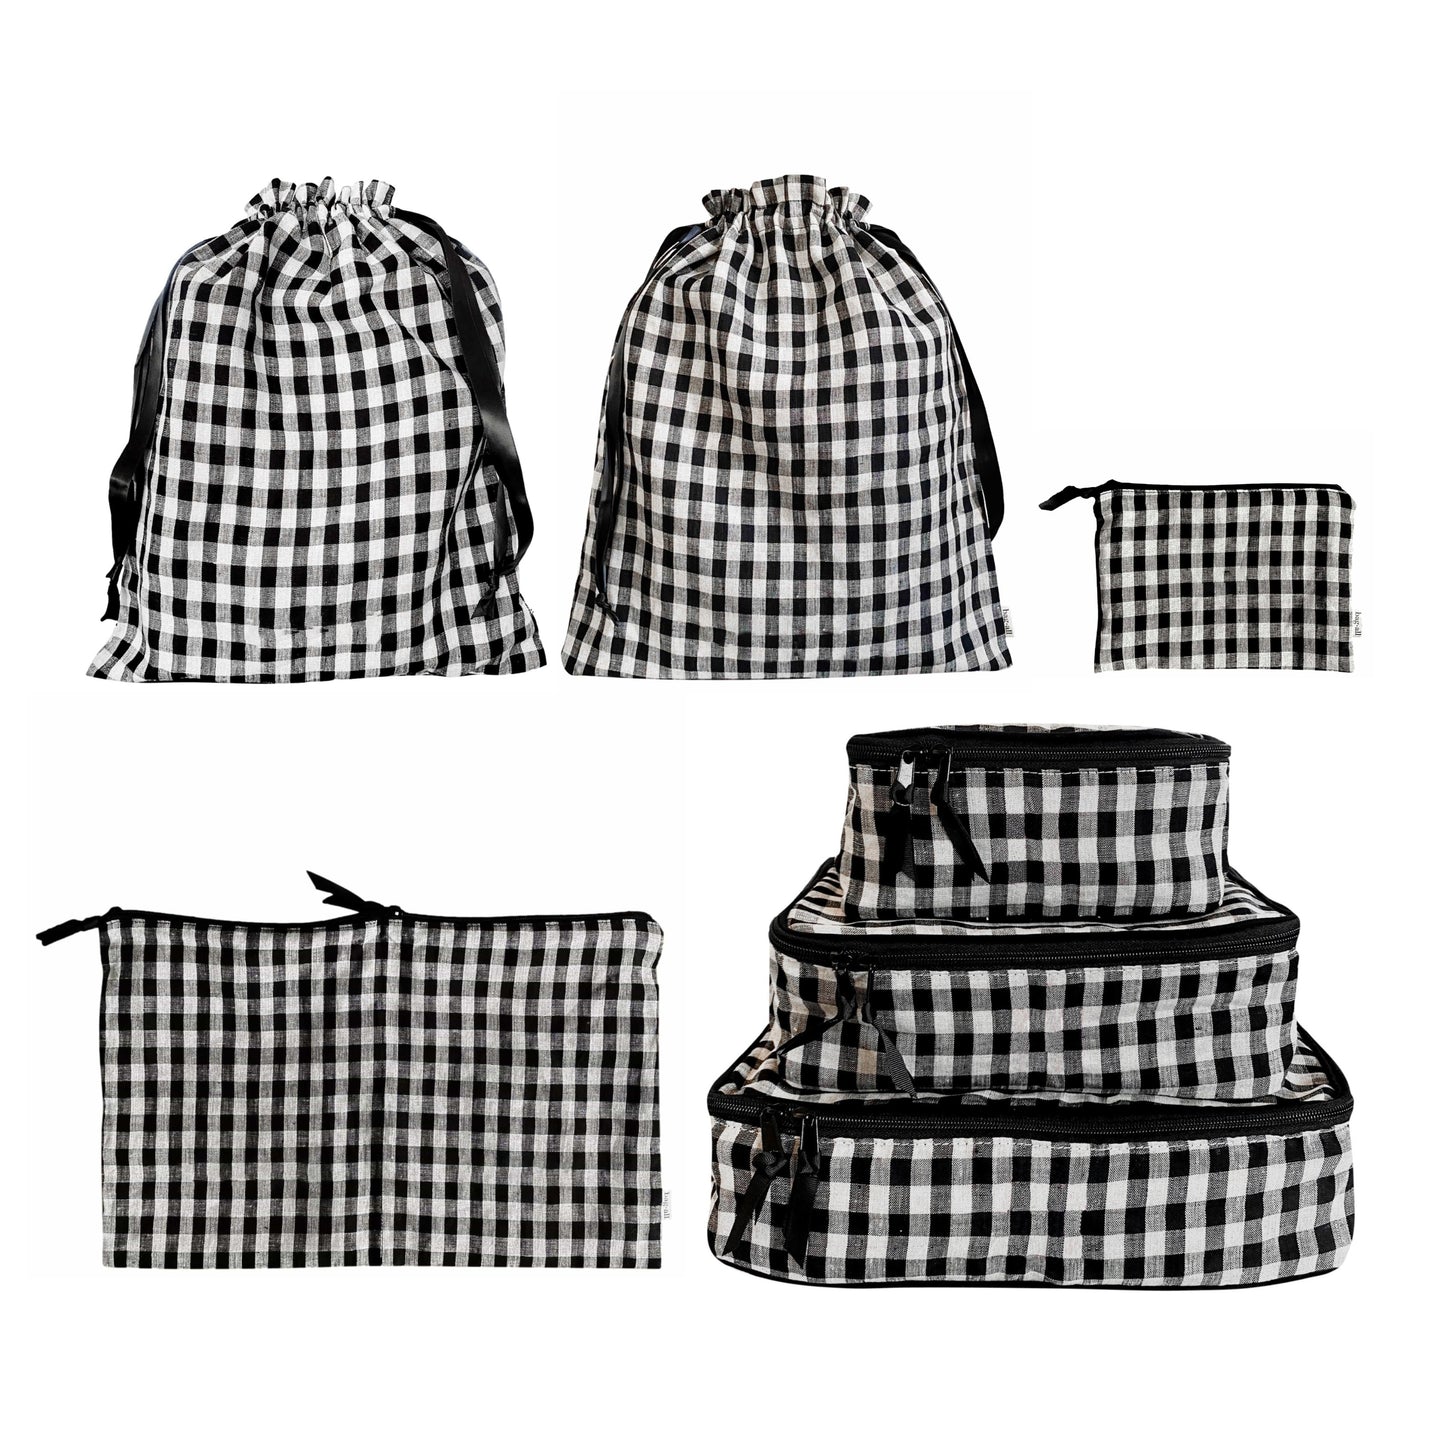 
                  
                    CUSTOM BA Packing Organizers and Travel Set in Gingham Linen, 7-pack Checkered
                  
                